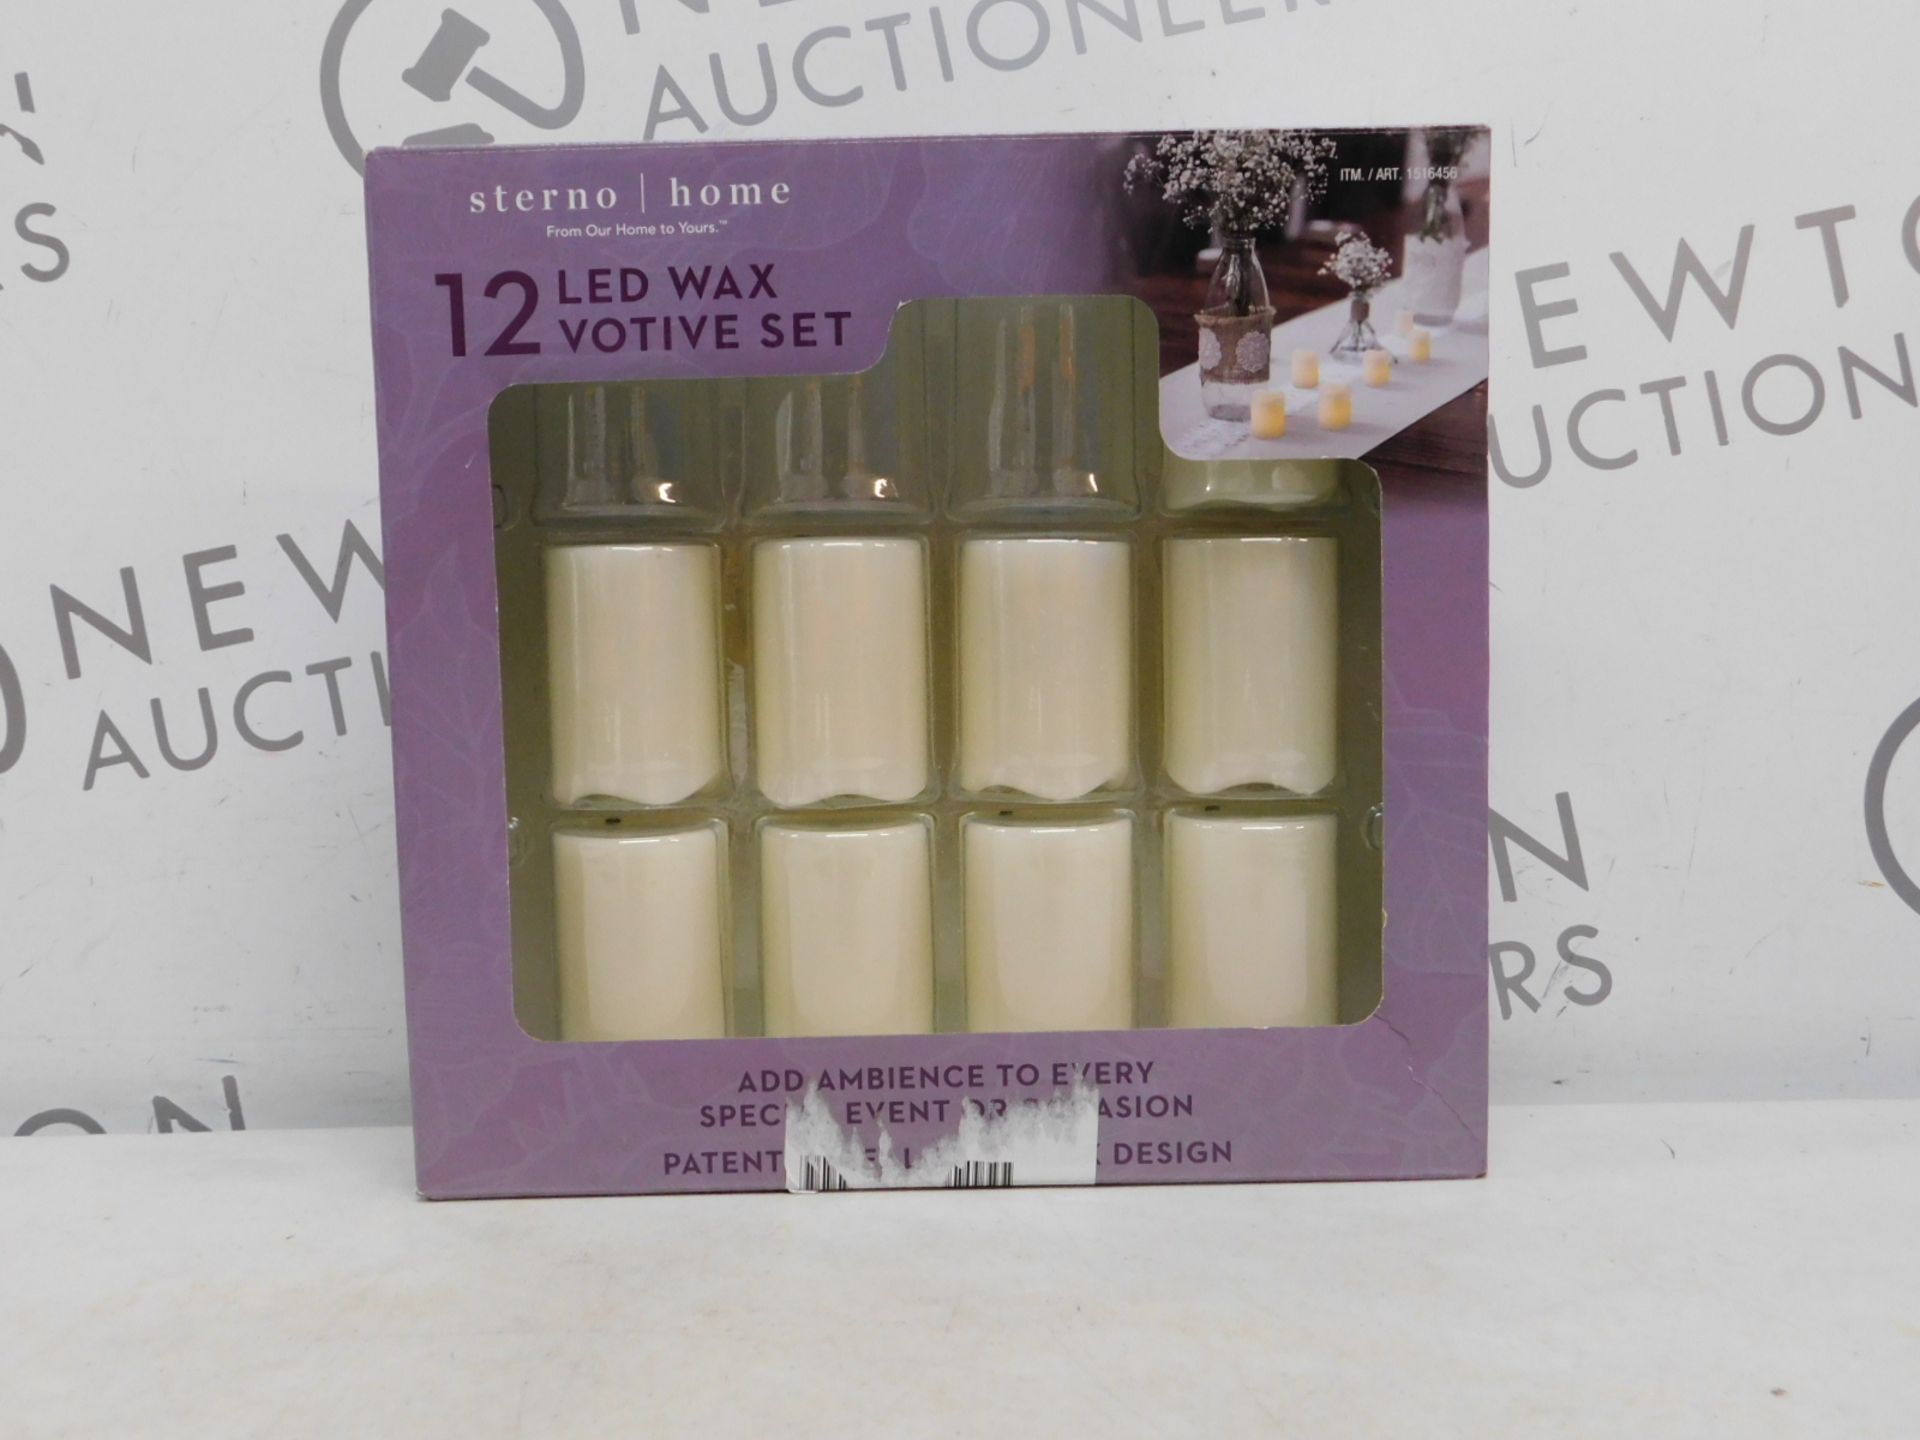 1 BOXED STERNO LED WAX VOTIVE CANDLES RRP Â£24.99